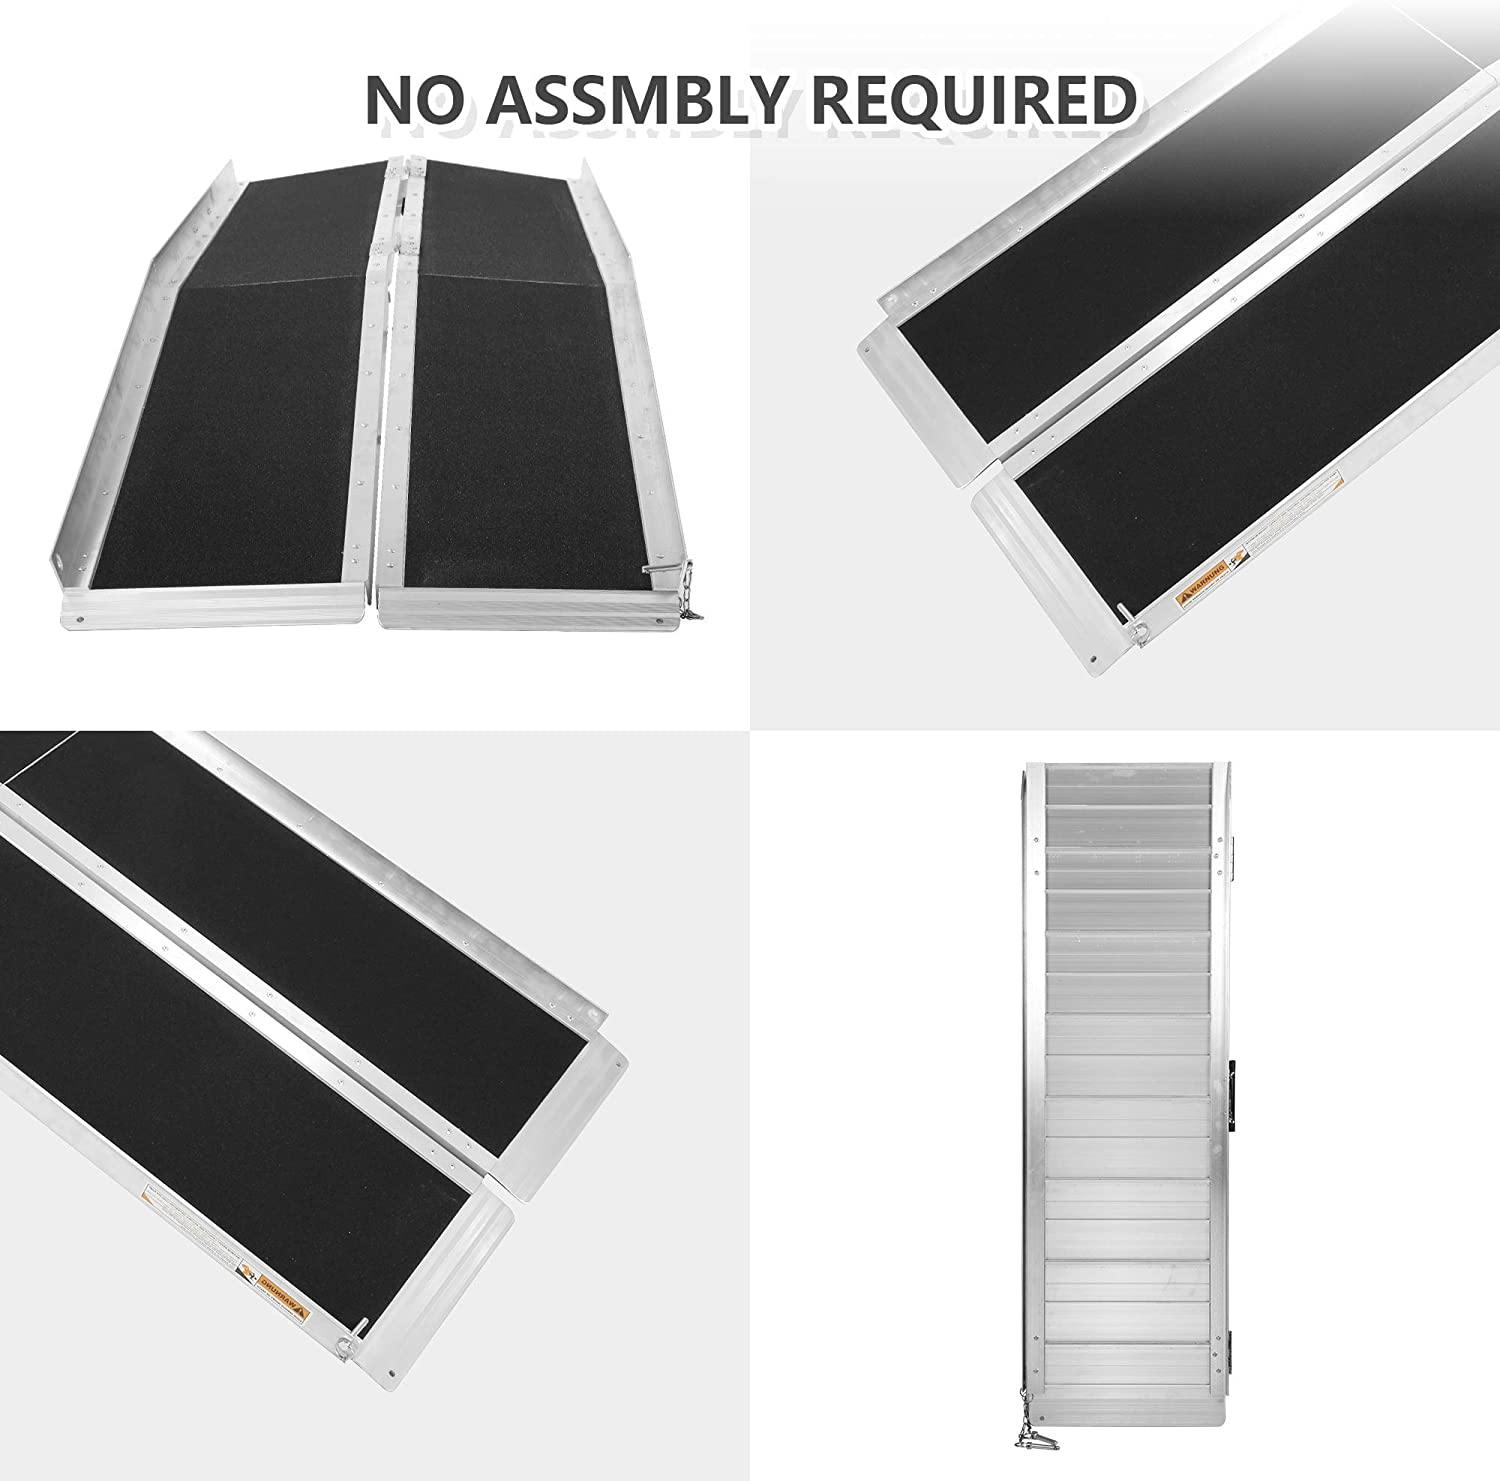 Portable Wheelchair Ramp 6Ft, Add to Your Independence, 600 LBS Capacity, Folding Aluminum Alloy Ramp - Bosonshop